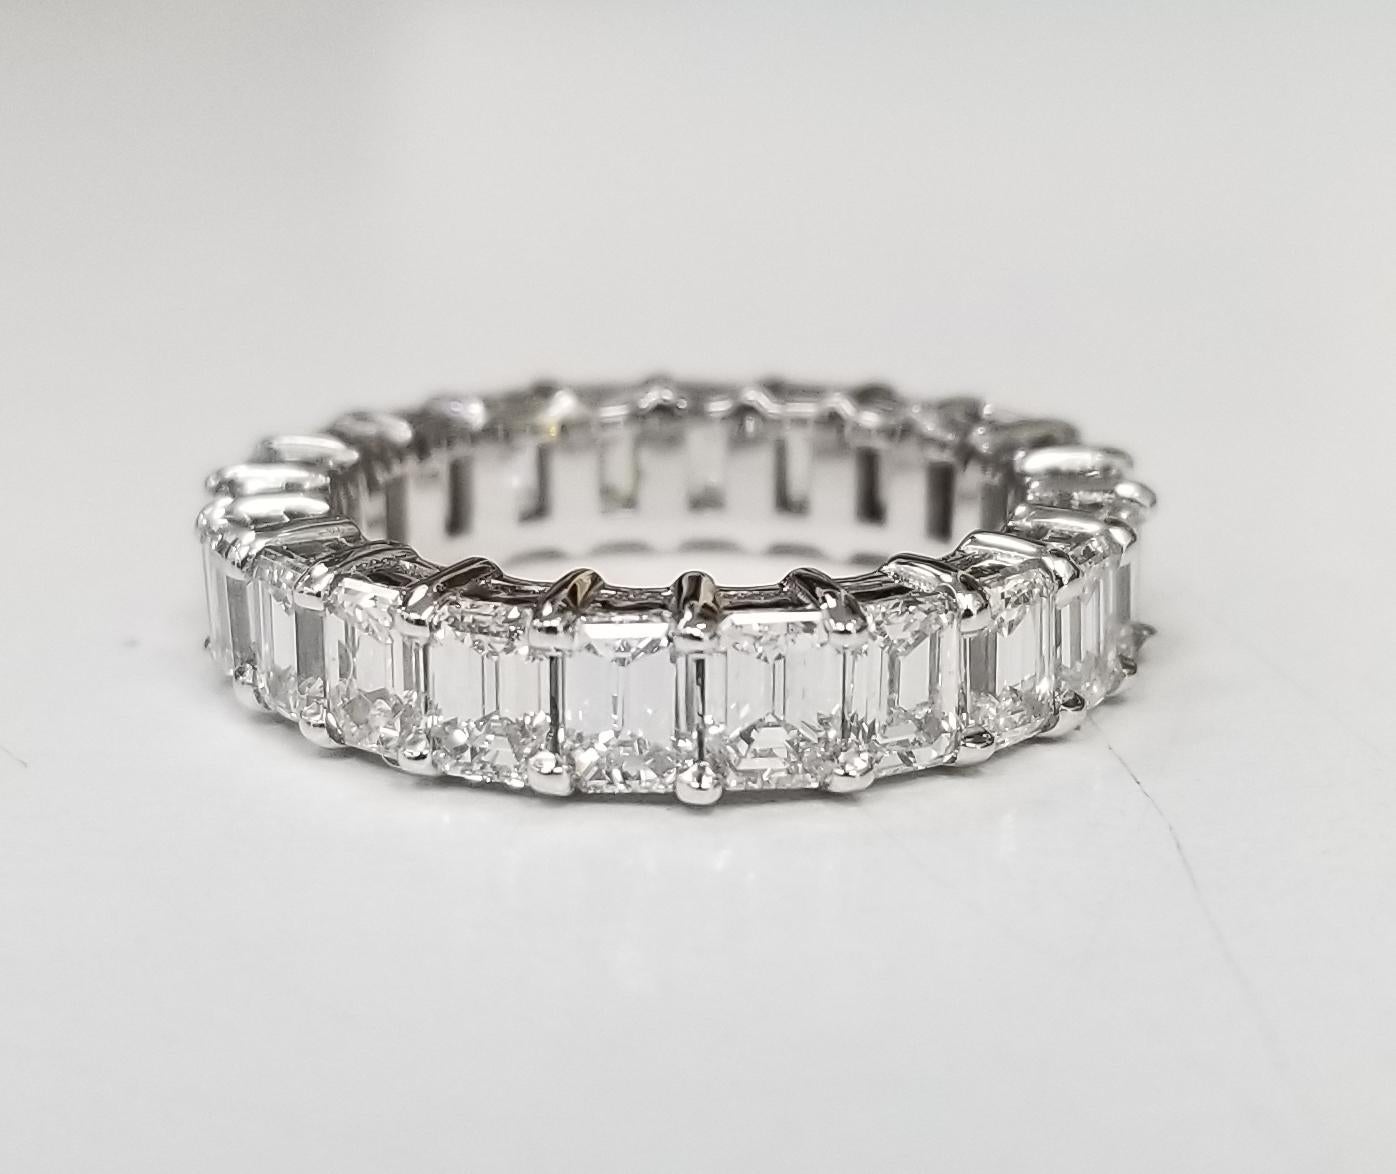 This beautiful Layout of emerald cut diamonds for an eternity ring is just waiting for you to decide on your ring.  Featuring 19 emerald cut diamonds set in 14k white gold weighing 6.07carats. These spectacular diamonds are G in color, VS1-2 